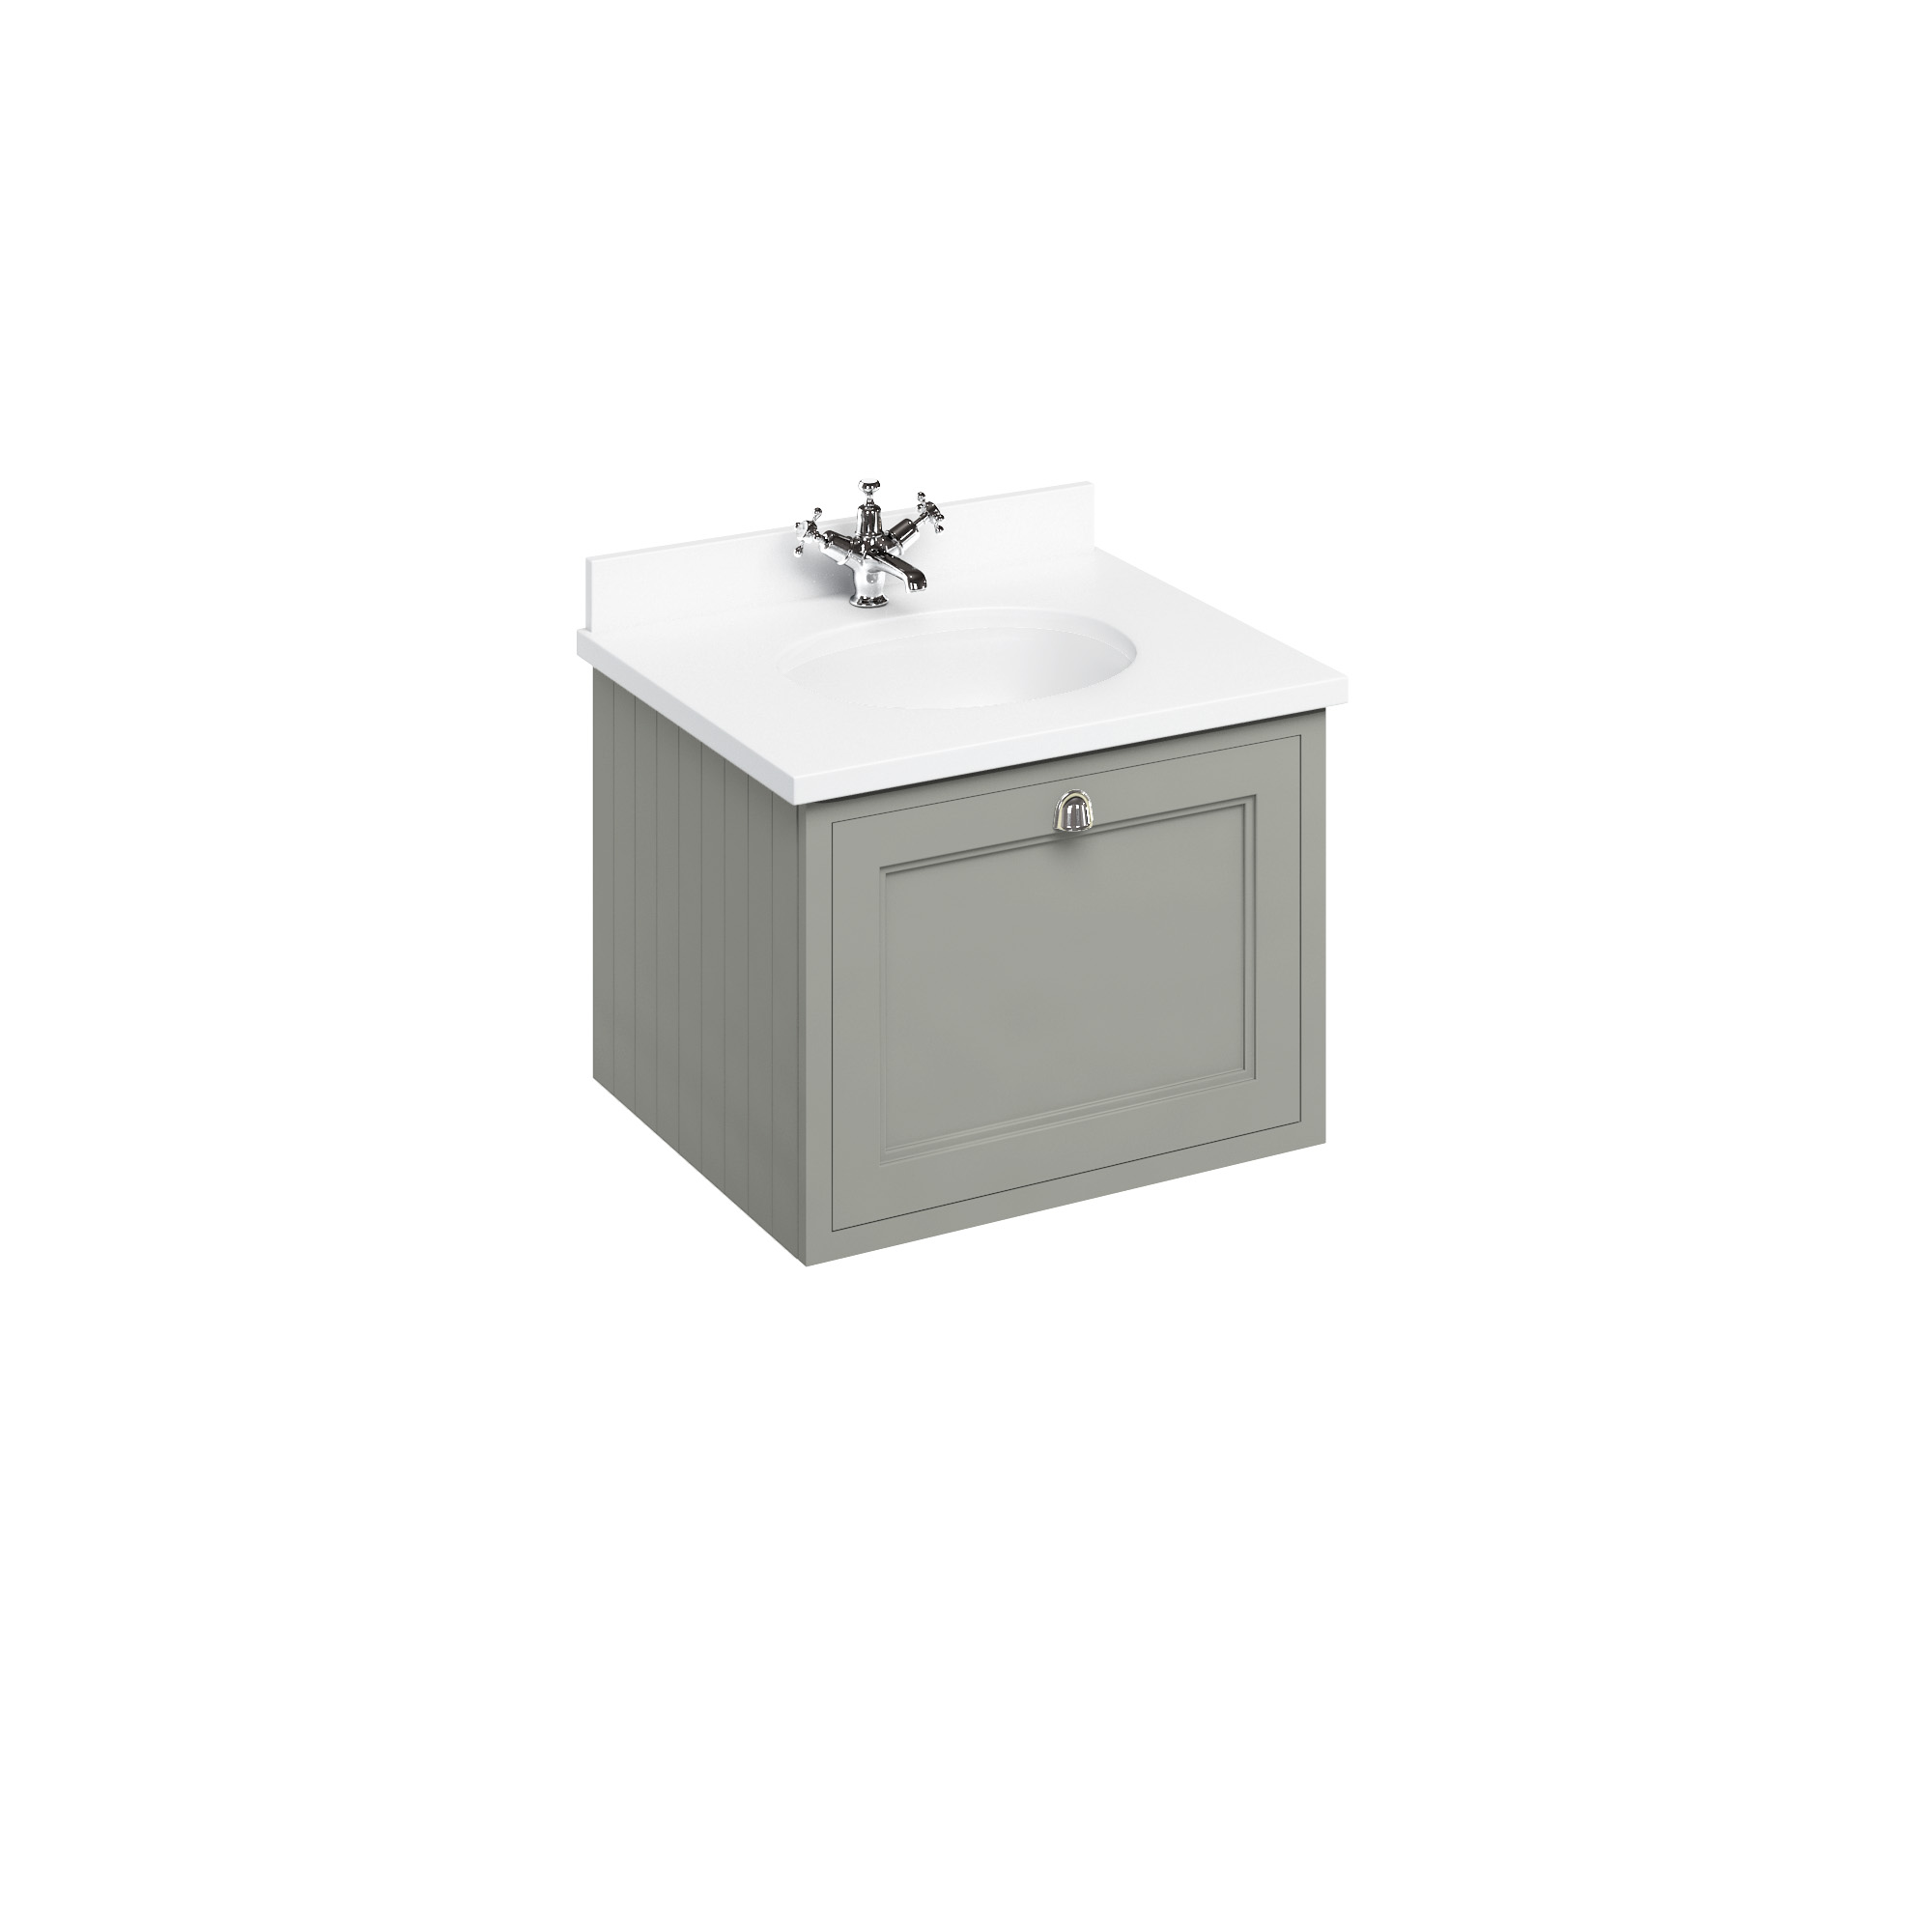 Wall Hung 65 Vanity Unit single drawer - Dark Olive and Minerva white worktop with integrated white basin